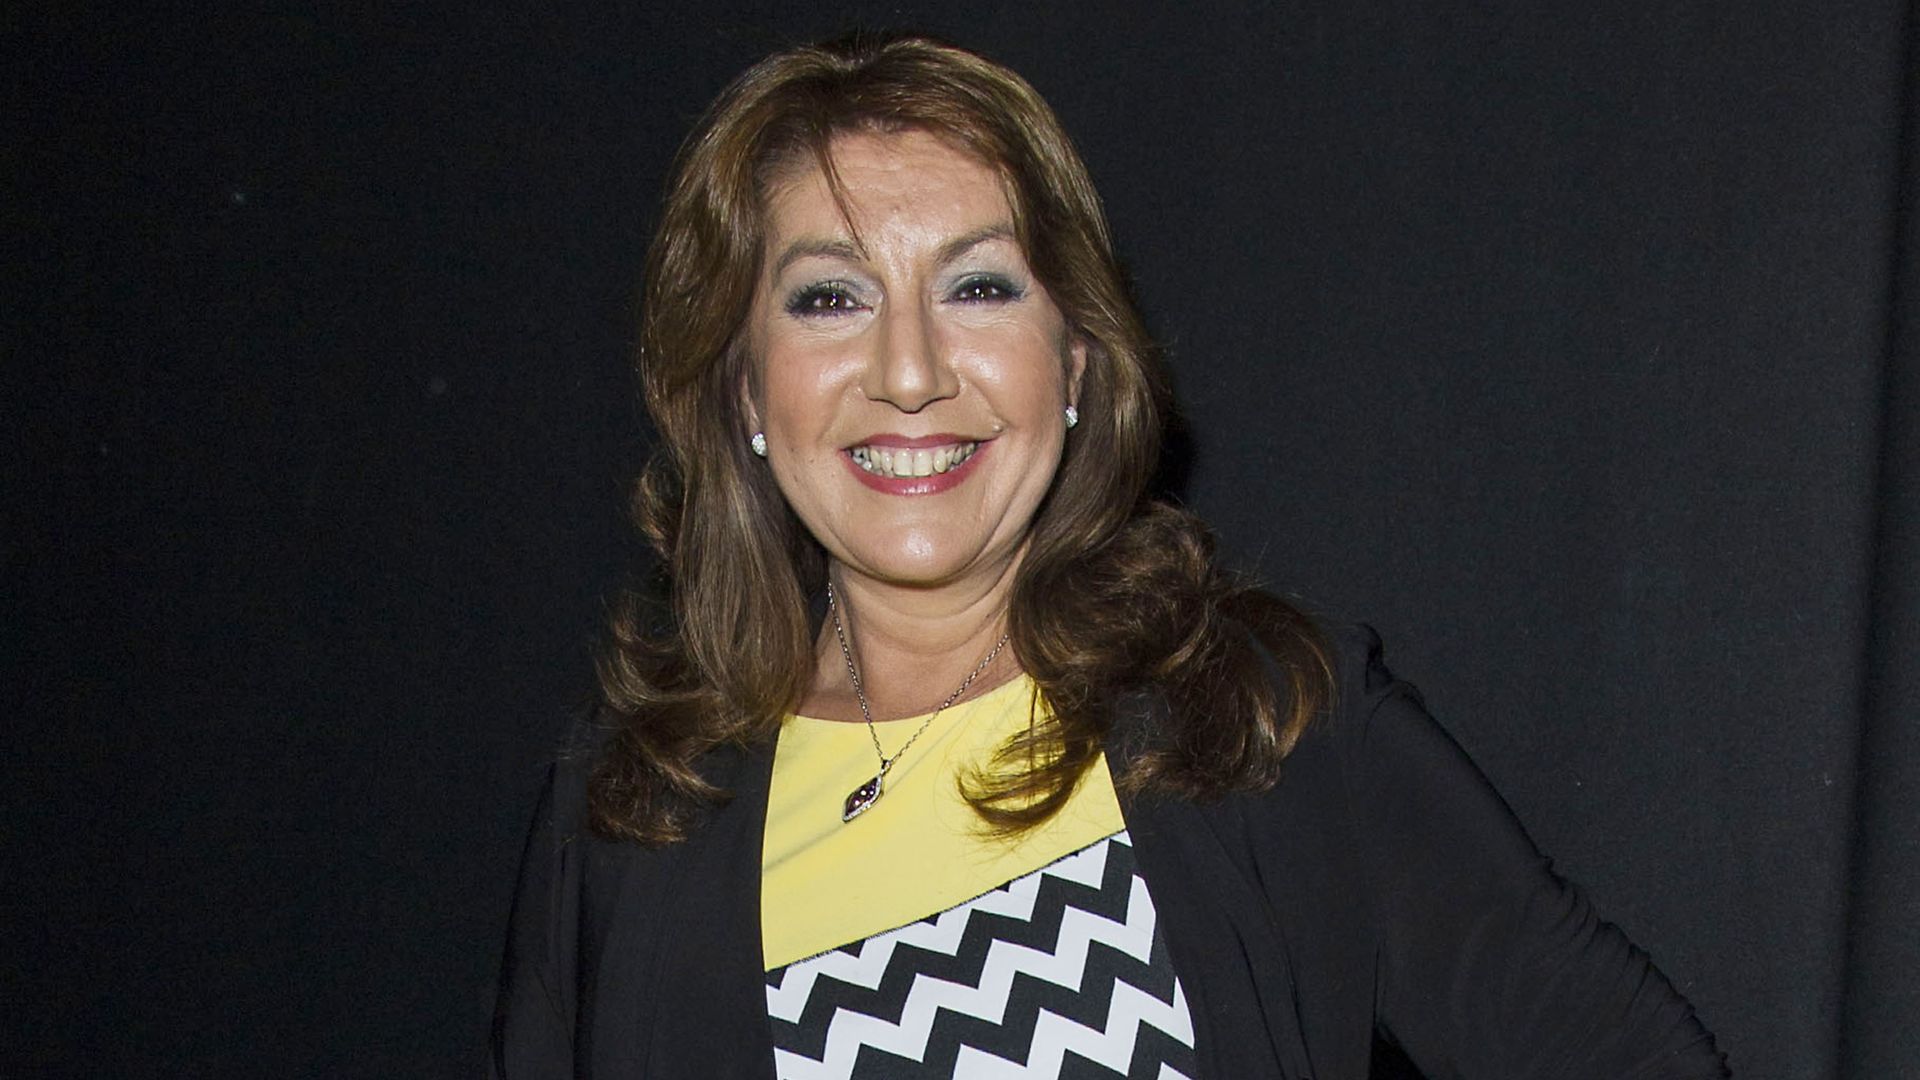 Jane McDonald in striped outfit